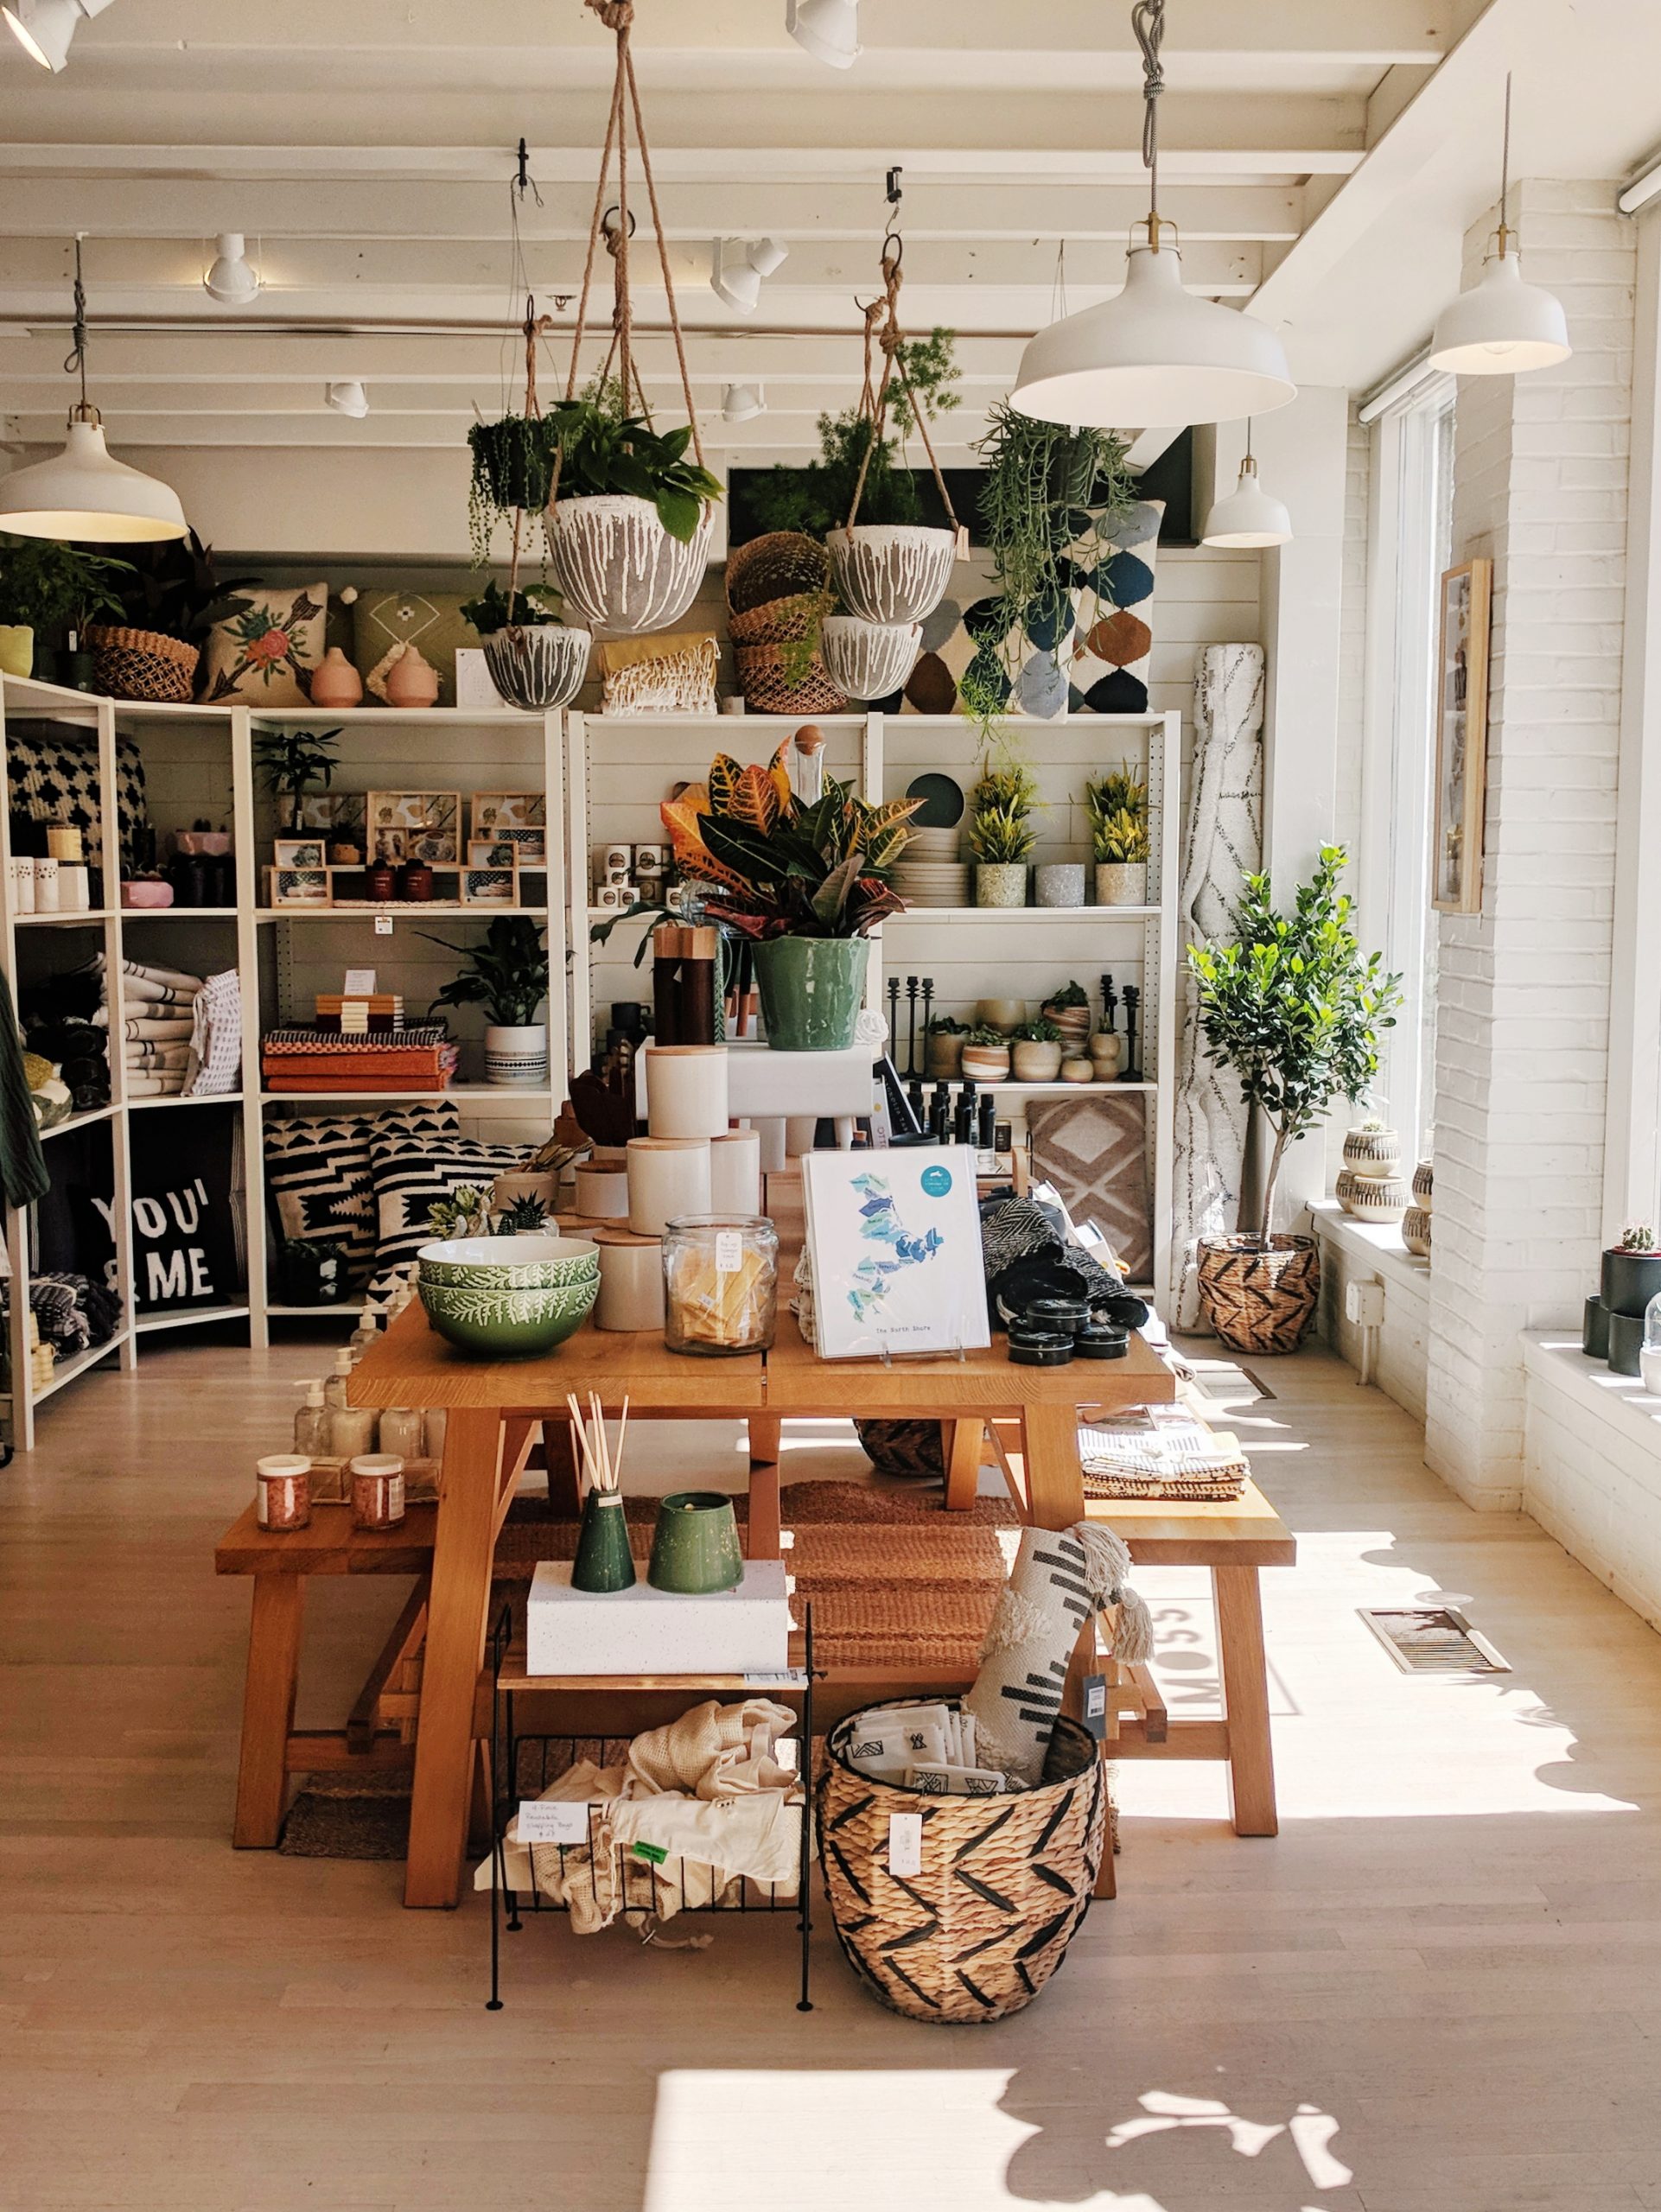 Oak+Moss shop in Salem, with hanging plants and an aesthetic white interior